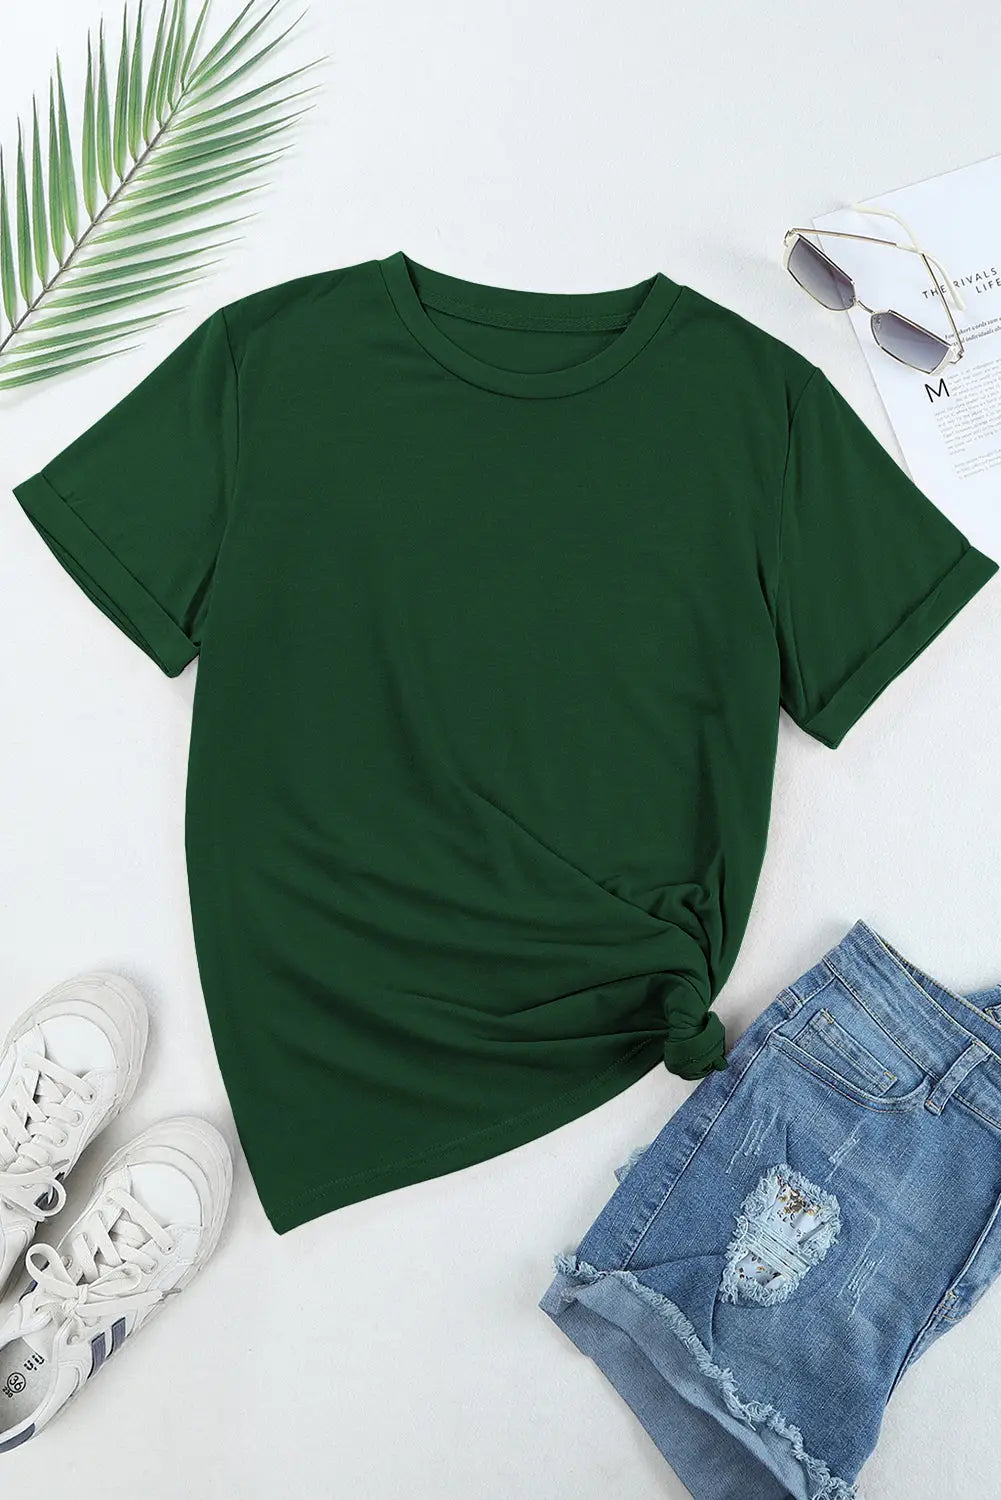 Red casual plain crew neck tee - t-shirts